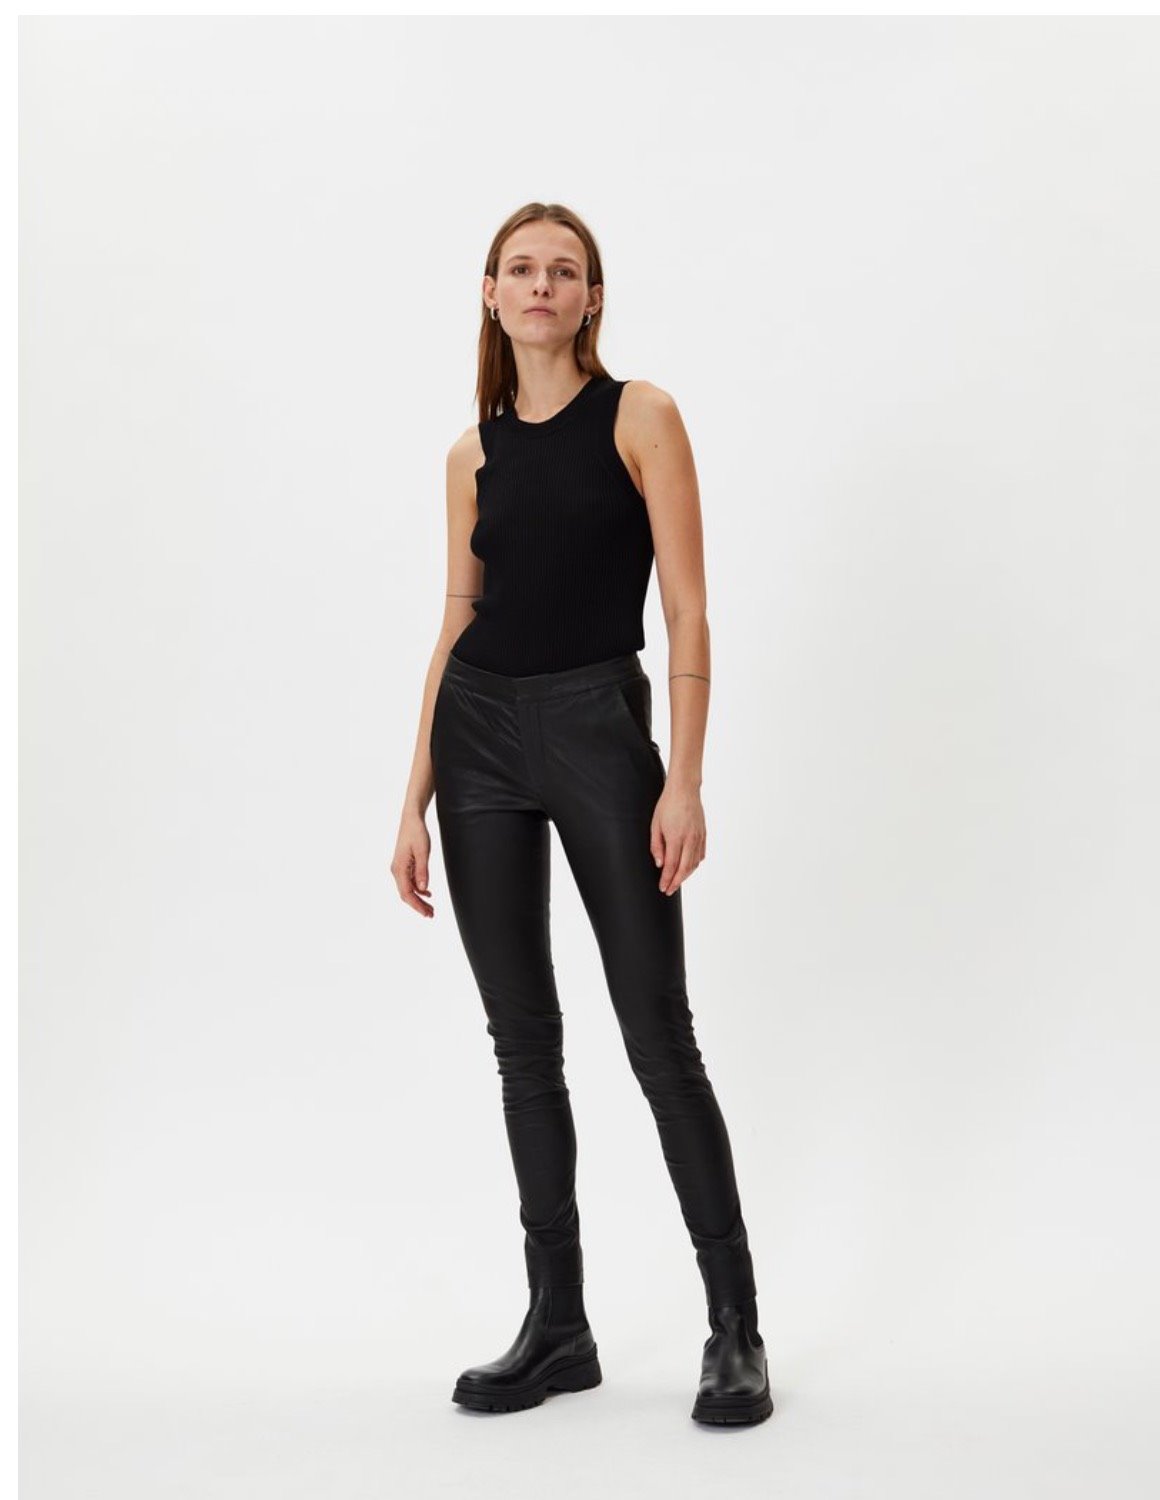 LEATHER TROUSERS  LIMITED EDITION  Black  ZARA Angola